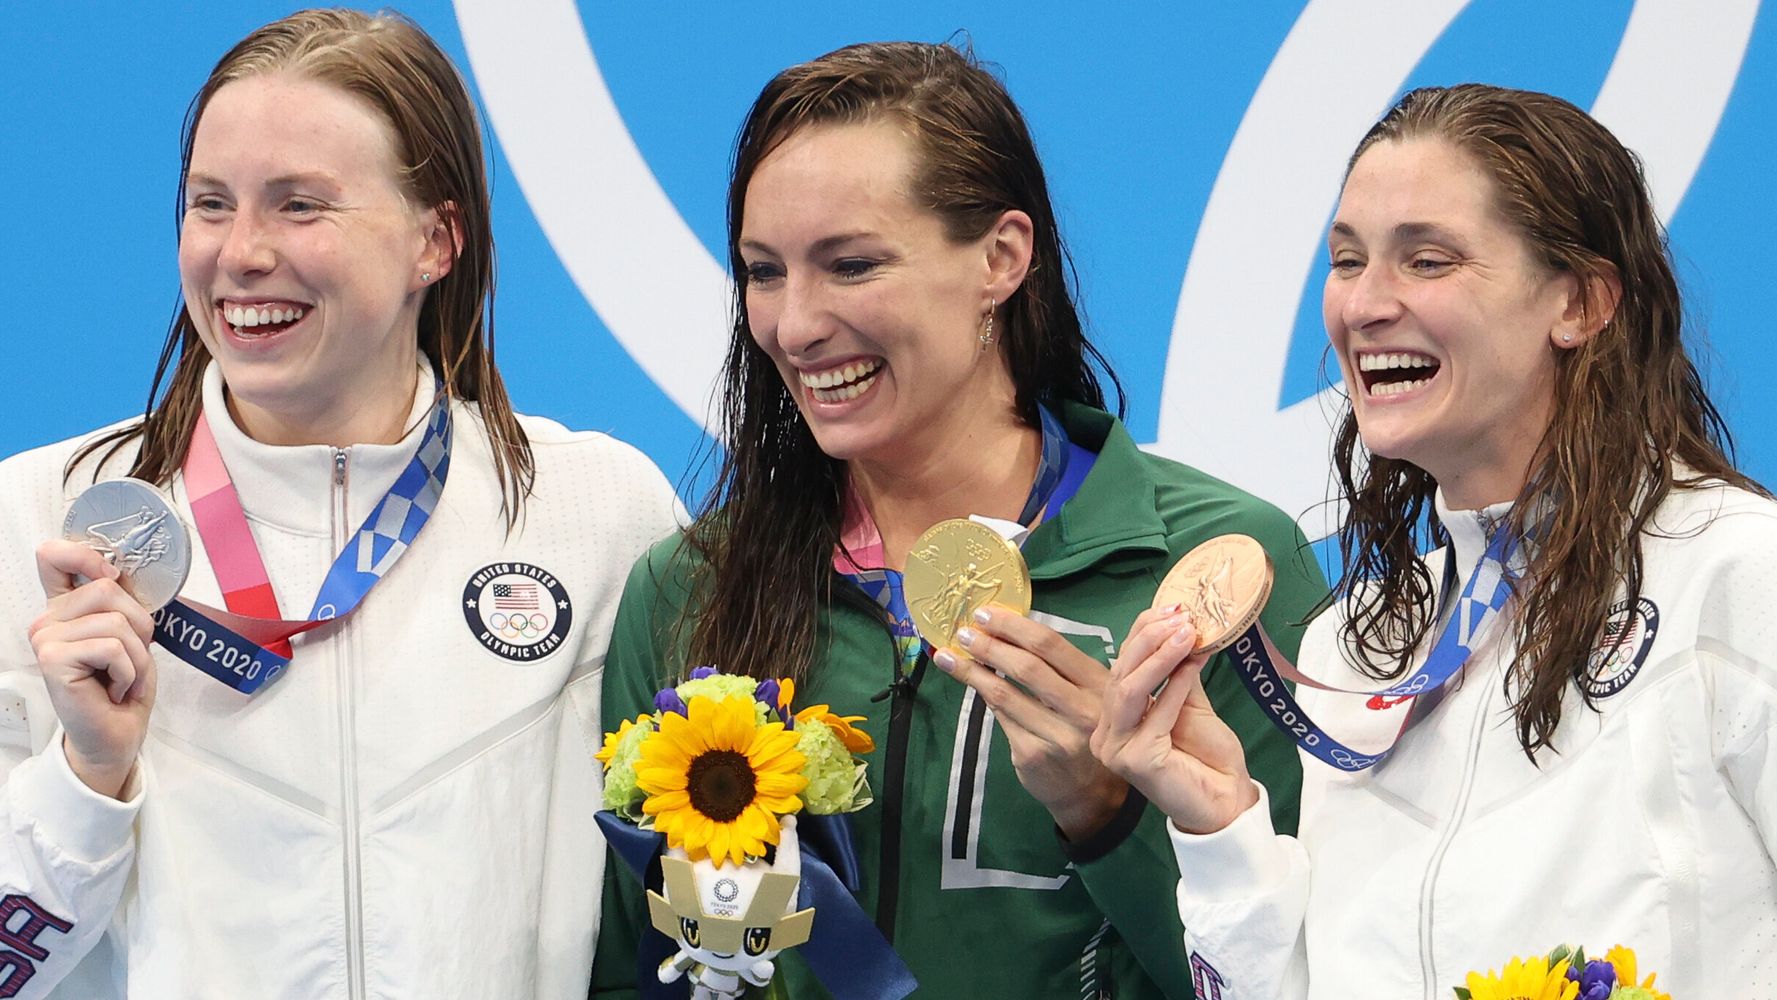 Olympic Swimmer Lilly King Says This 1 American Trait Is 'Bulls**t'